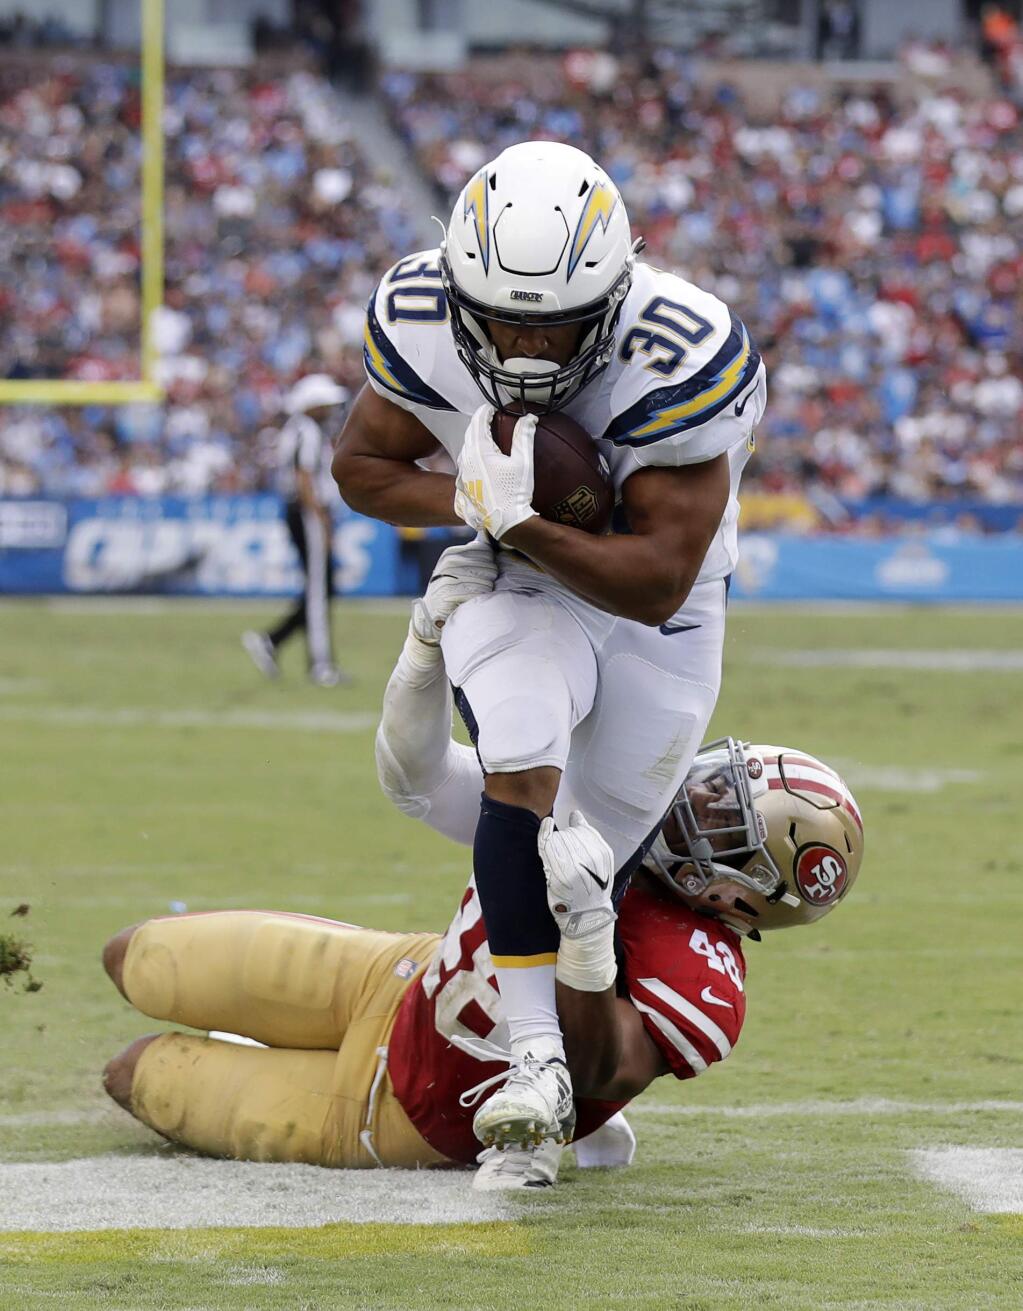 Los Angeles Chargers running back Austin Ekeler, top, runs in for a touchdown as San Francisco 49ers linebacker Fred Warner tries to tackle him during the first half Sunday, Sept. 30, 2018, in Carson. (AP Photo/Marcio Sanchez)